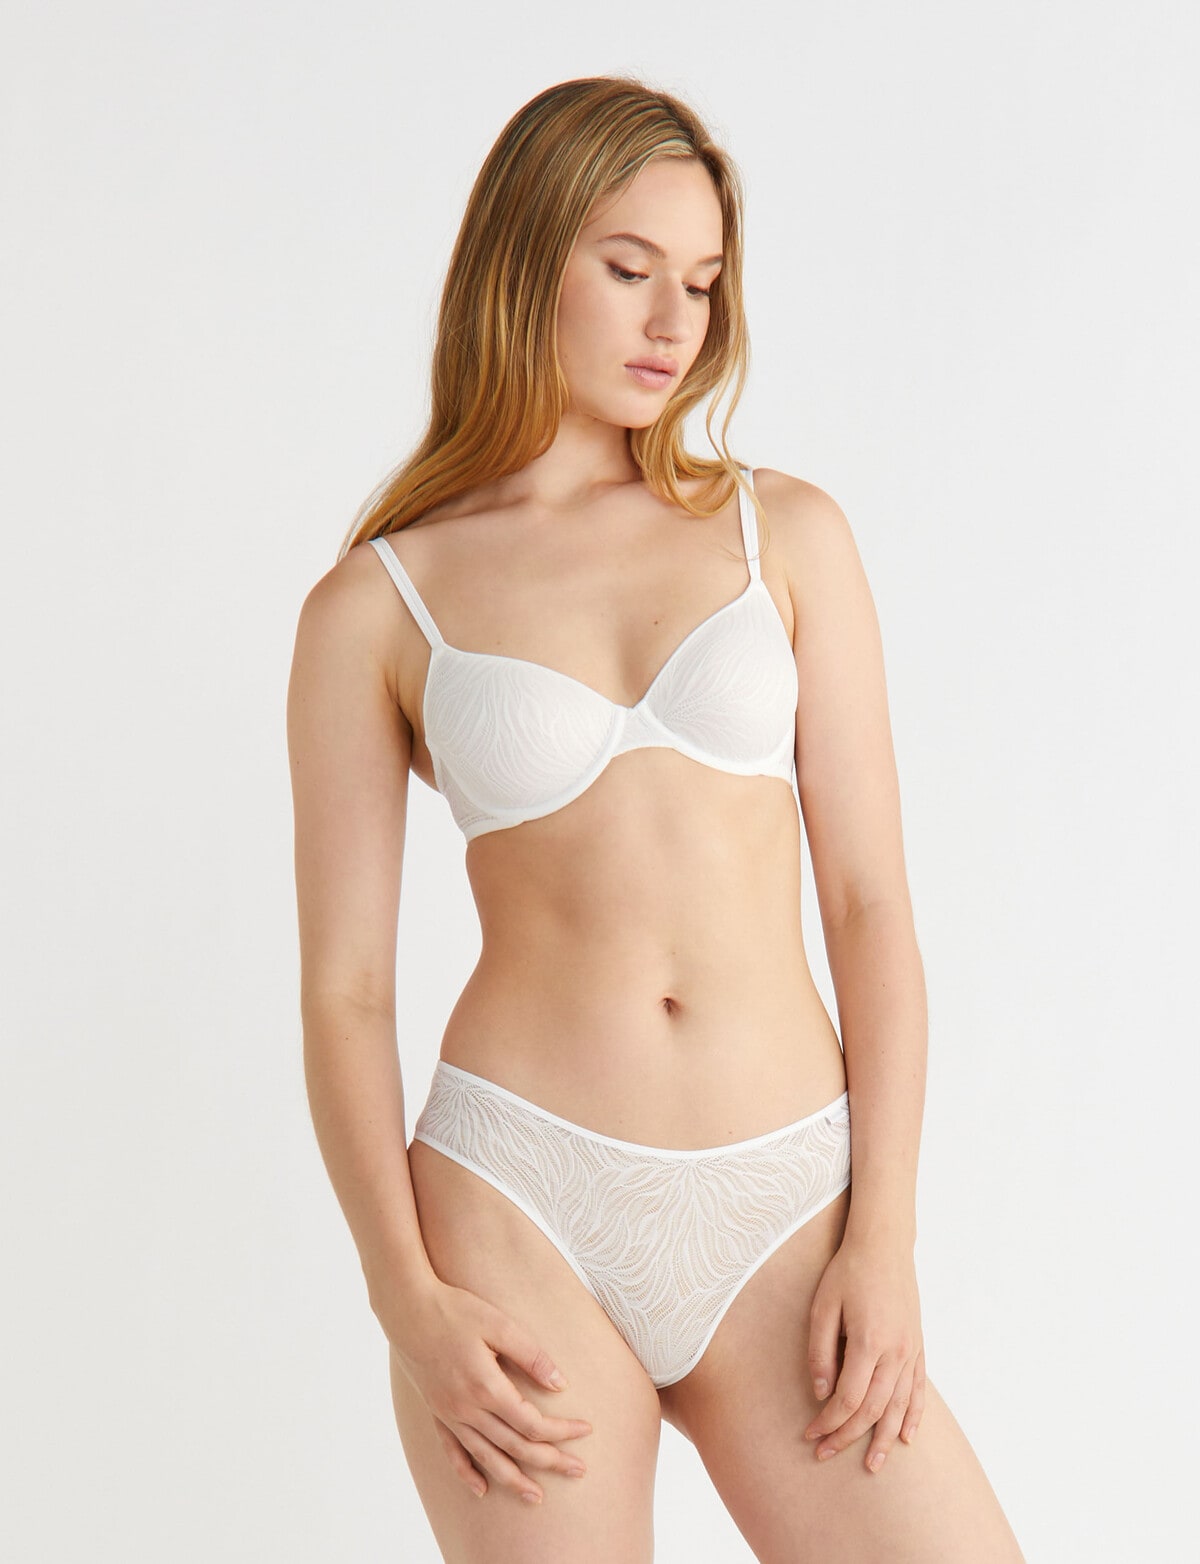 Calvin Klein Sheer Marquisette Unlined Demi Bra  Urban Outfitters Mexico -  Clothing, Music, Home & Accessories